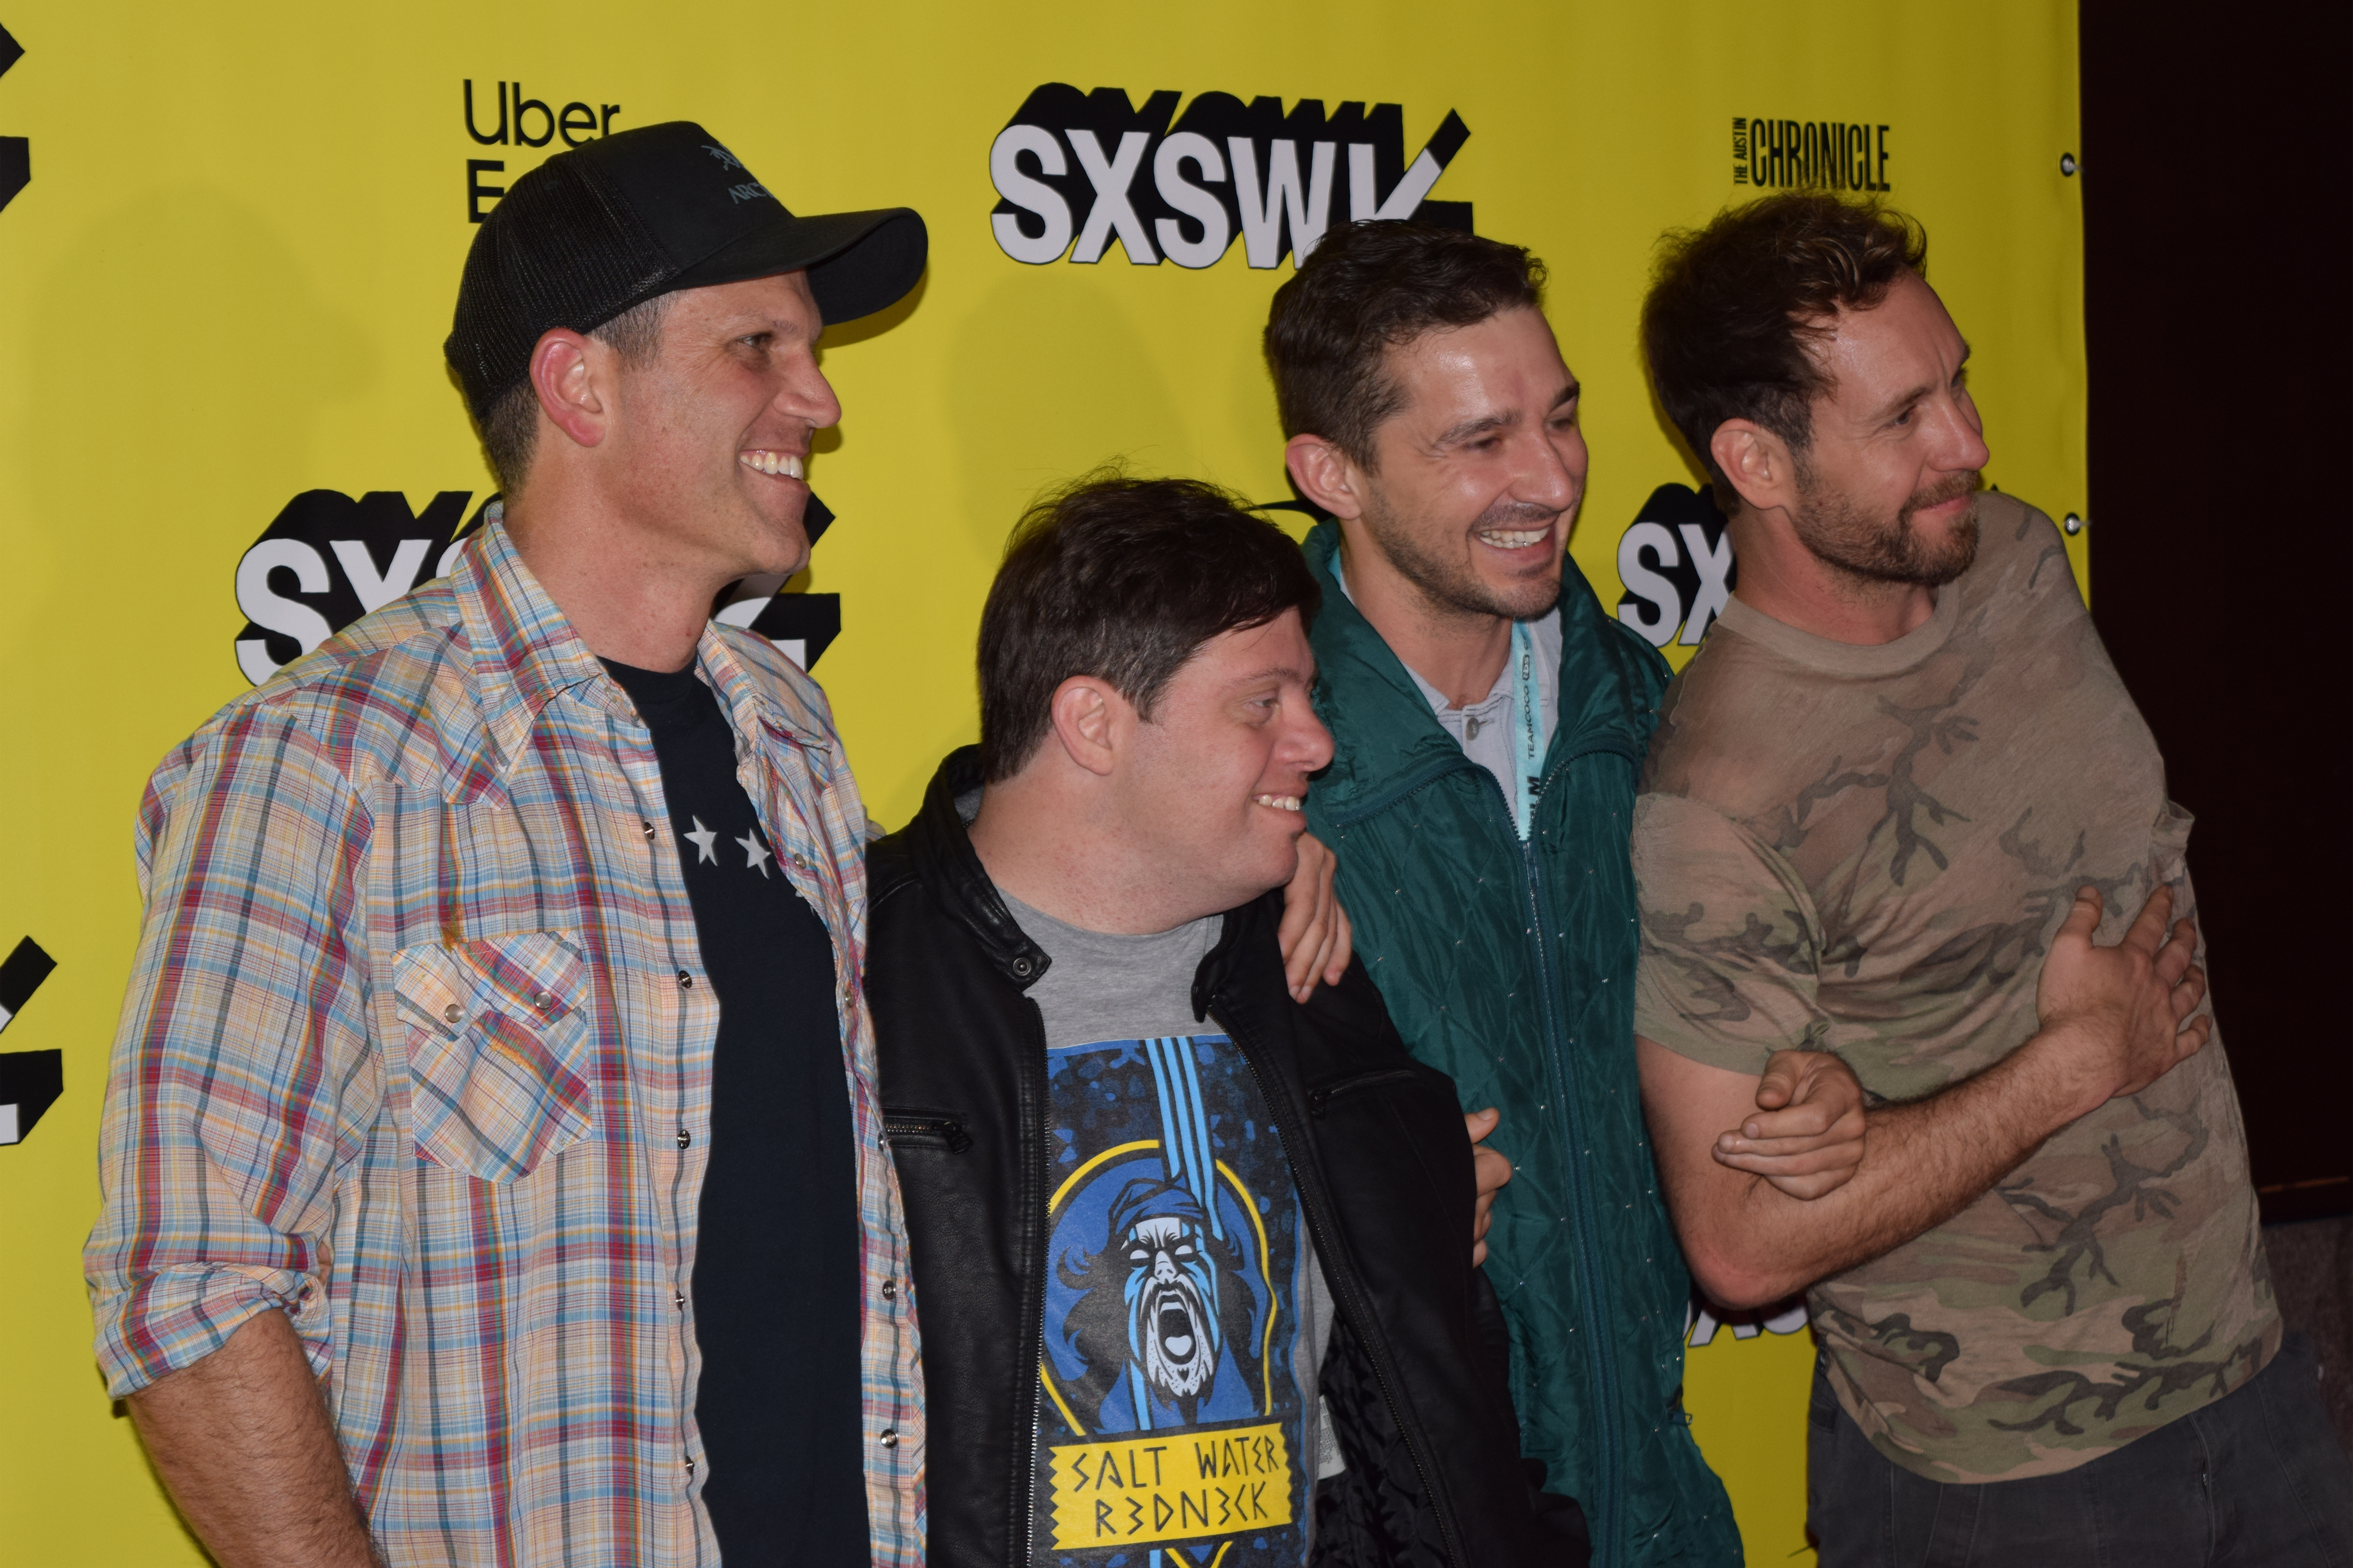 The crew is all smiles after winning the "Audience Award" at the 2019 SXSW Film Festival. (L-R): Michael Schwartz, Zack Gottsagen, Shia LaBeouf, Tyler Nilson 